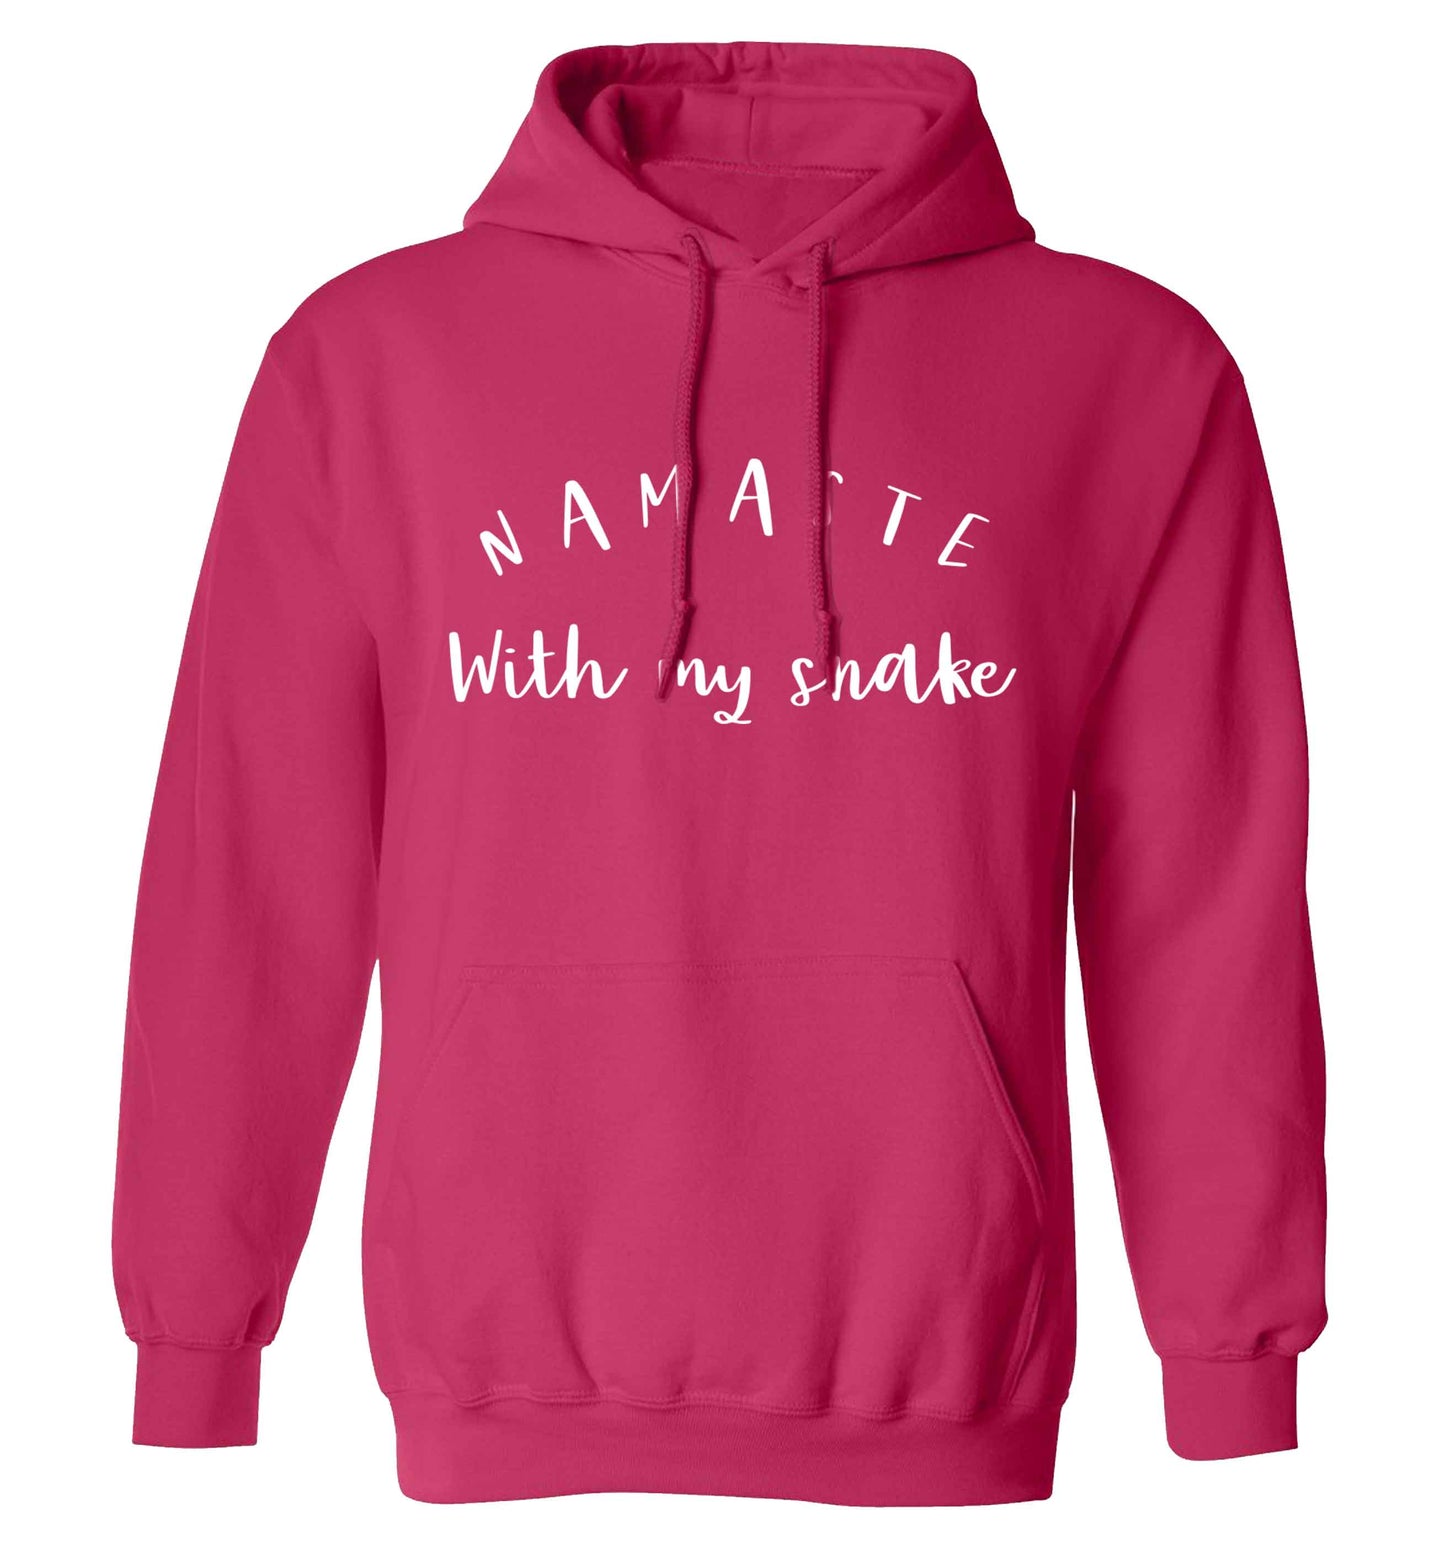 Namaste with my snake adults unisex pink hoodie 2XL